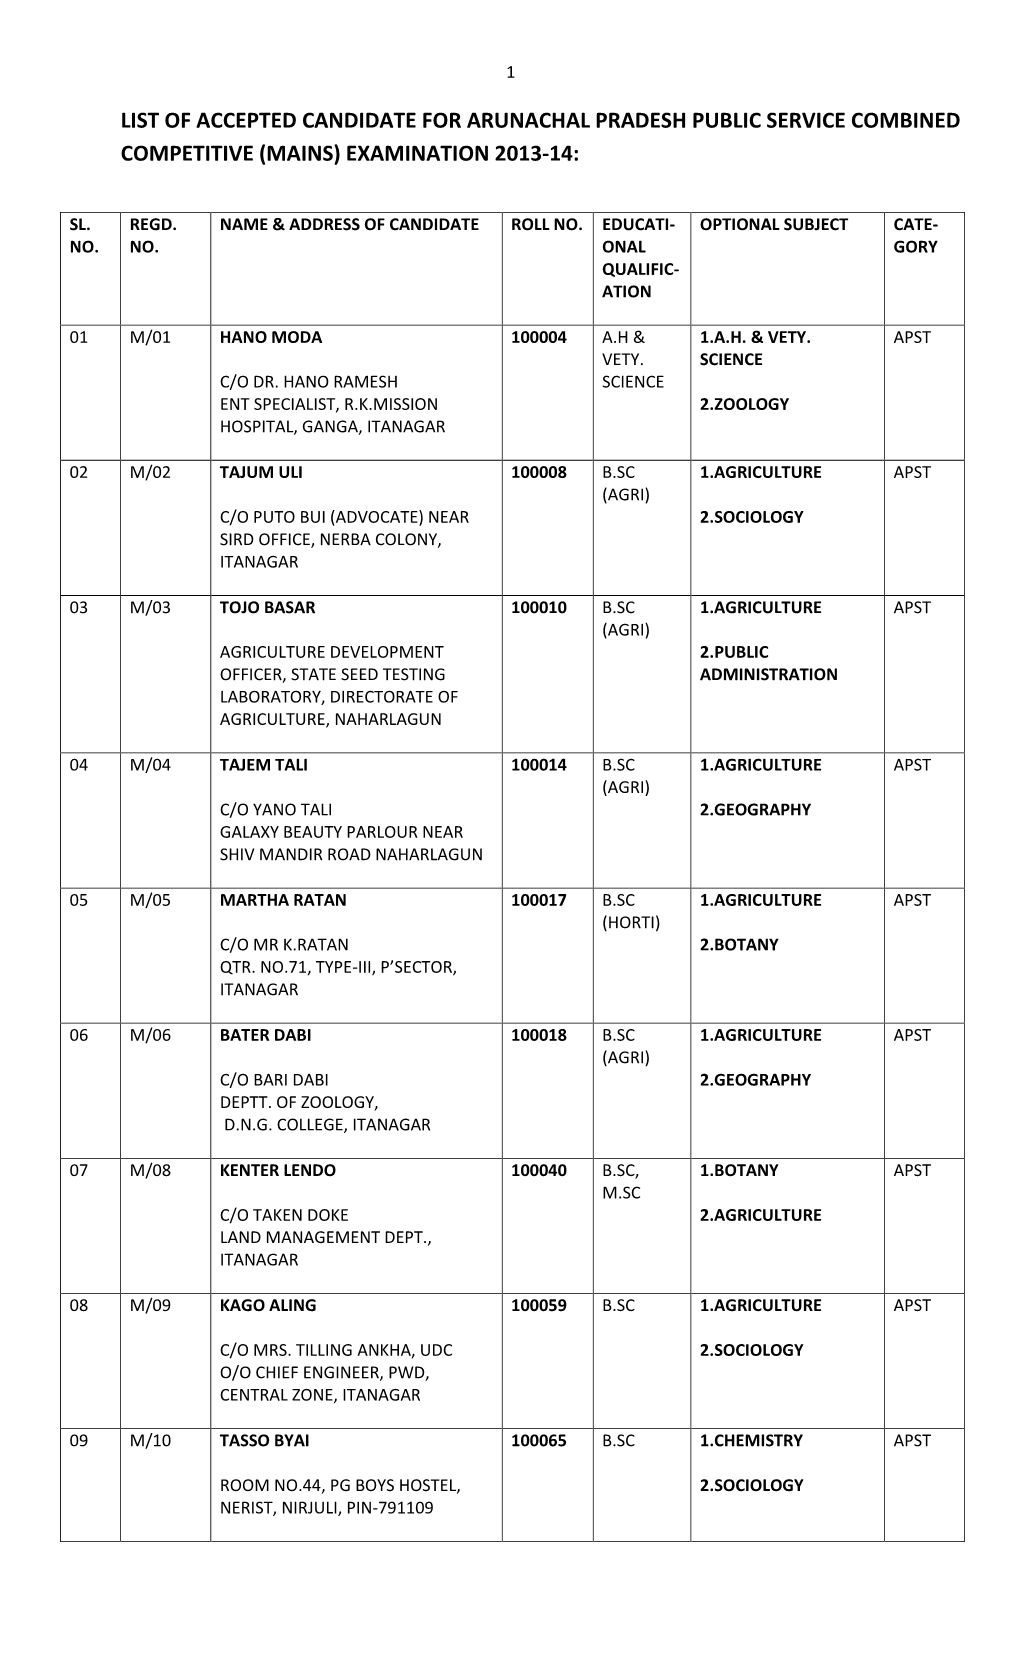 List of Accepted Candidate for Arunachal Pradesh Public Service Combined Competitive (Mains) Examination 2013-14